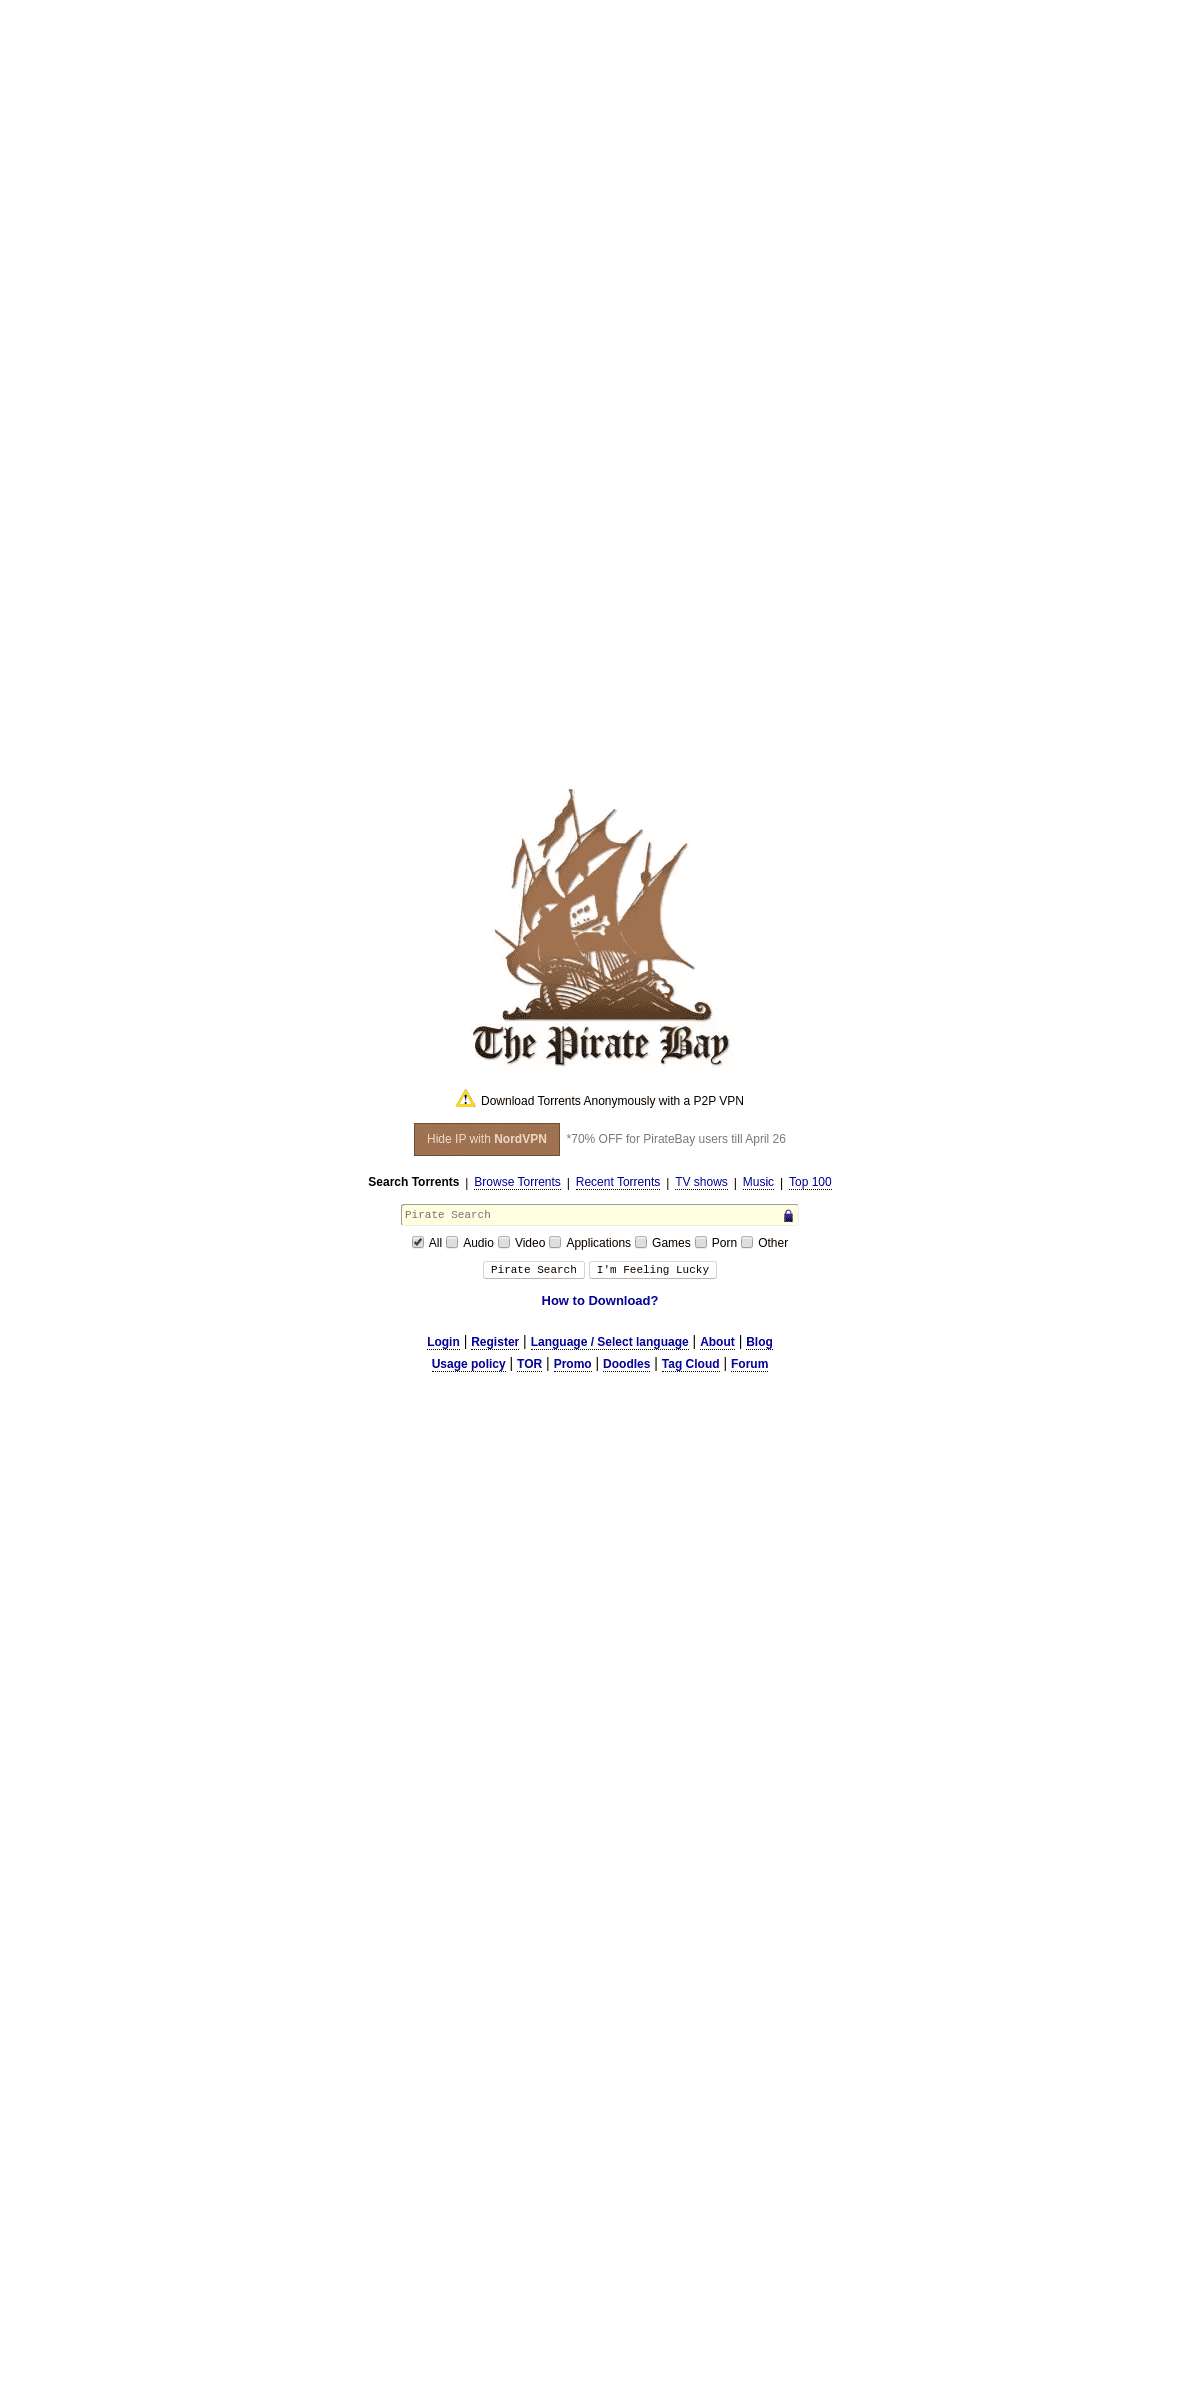 A complete backup of thepiratebay.wiki